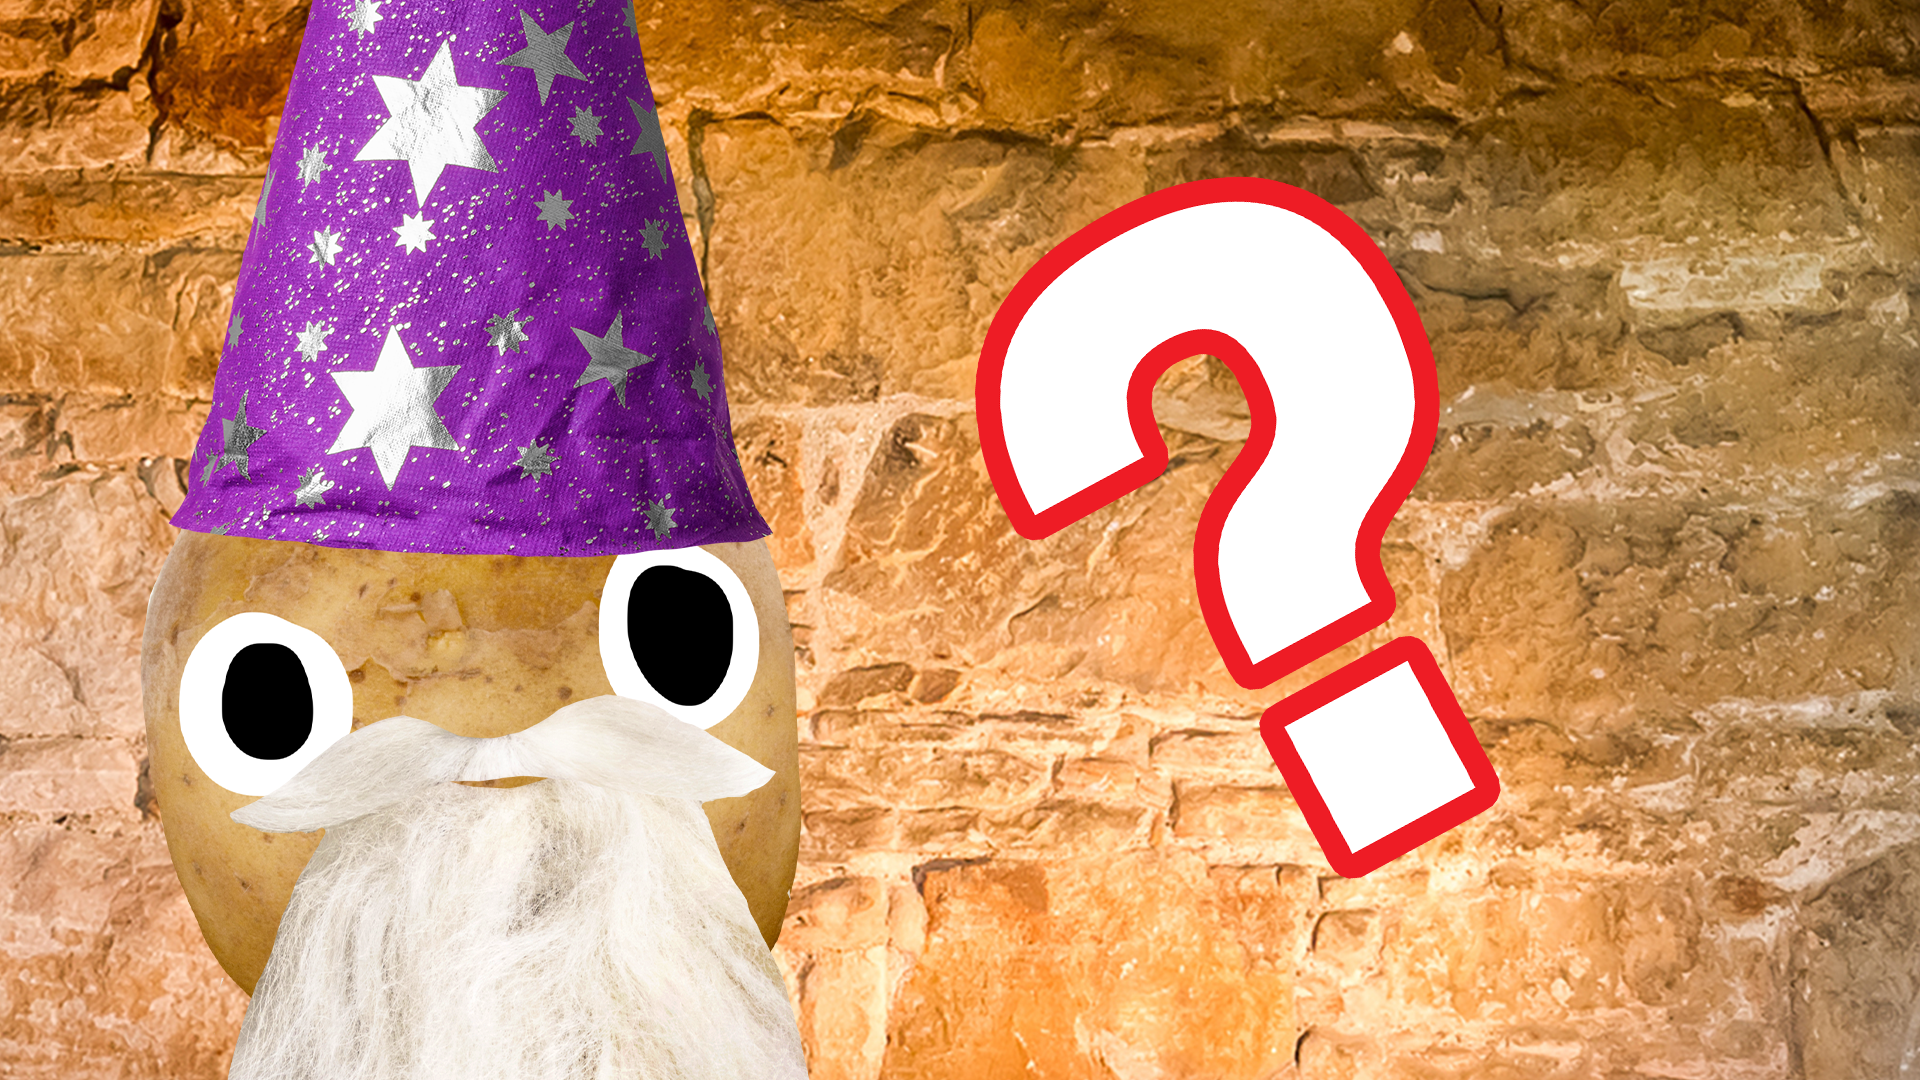 Beano Dumbledore on stone background with question mark